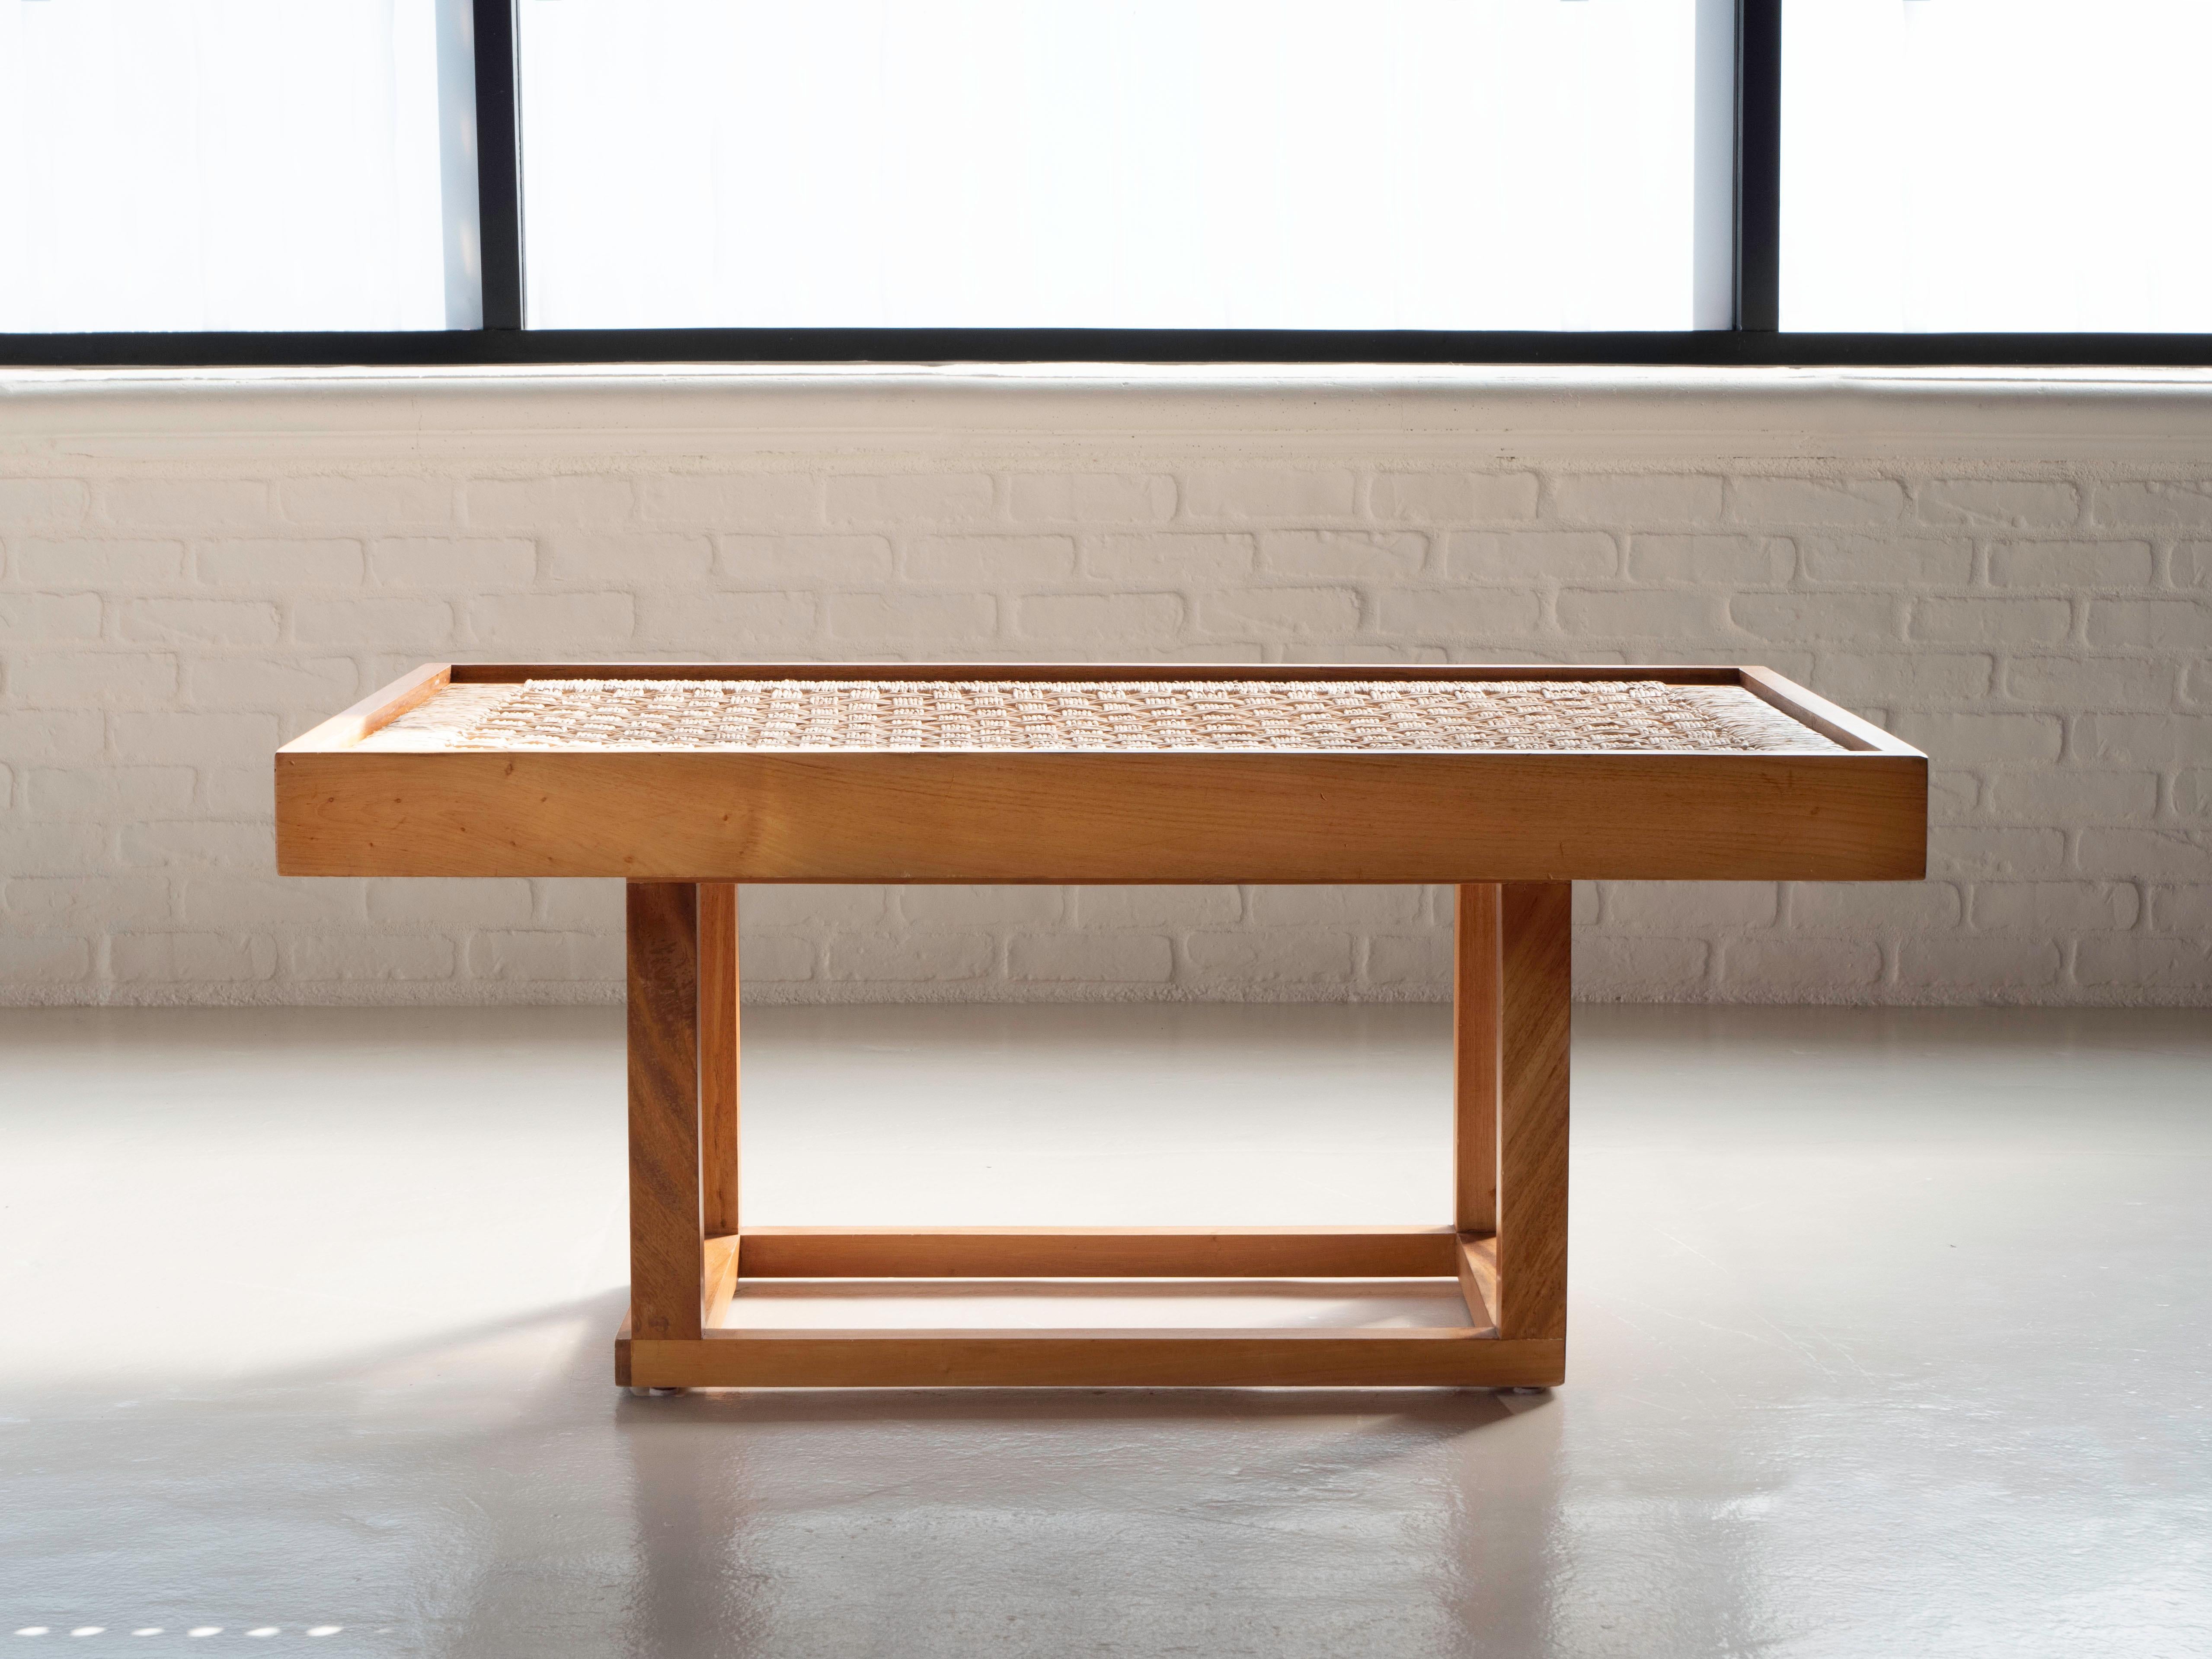 Solid wood coffee table designed by Michael Van Beuren for his company Domus. Purchased by the original owners in the 1950's during a trip to Mexico City. It can be converted into a dining table by inverting the base. We preferred the look of it